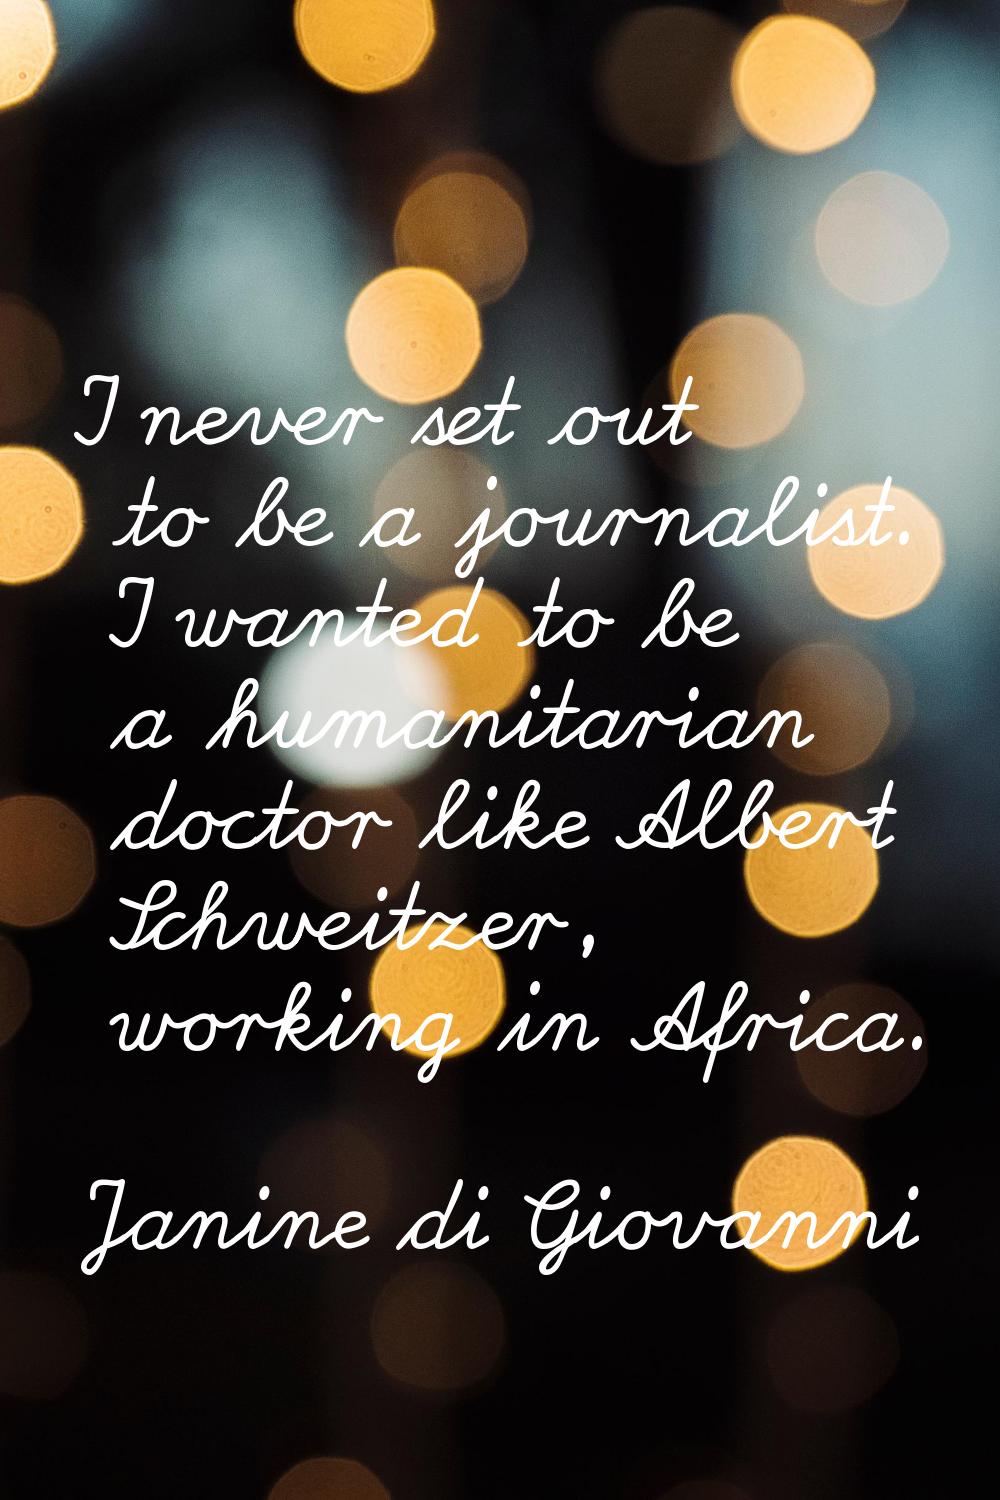 I never set out to be a journalist. I wanted to be a humanitarian doctor like Albert Schweitzer, wo